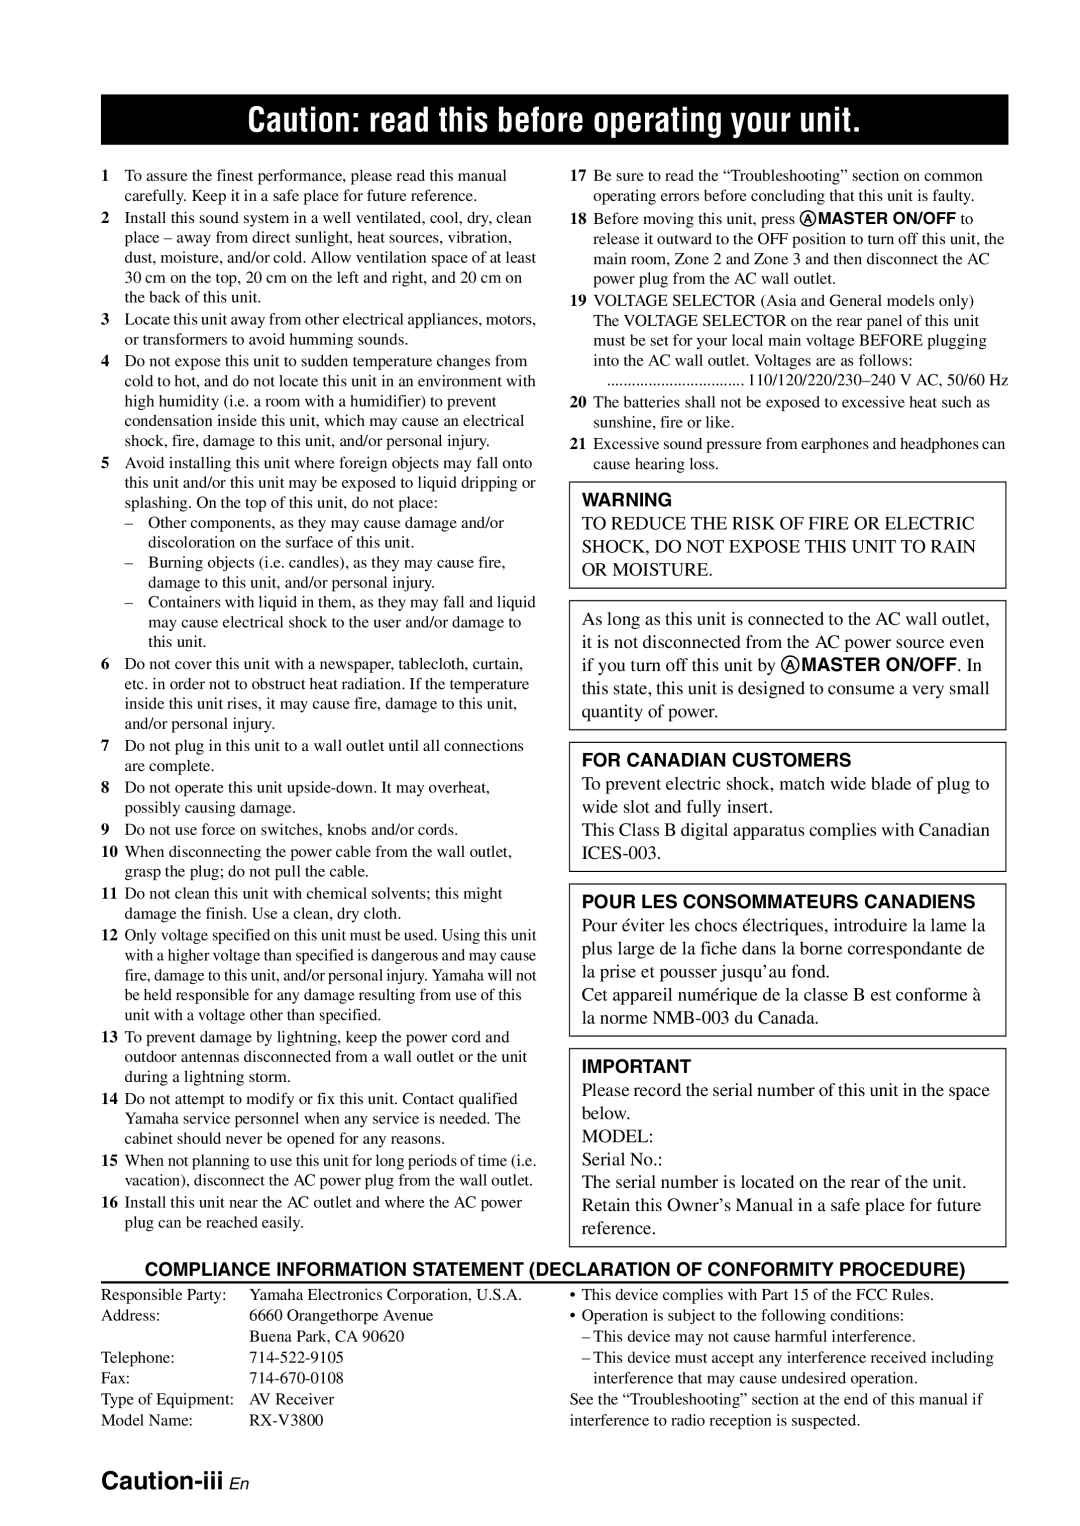 Yamaha RX-V3800 owner manual Caution read this before operating your unit, Caution-iii En, For Canadian Customers 